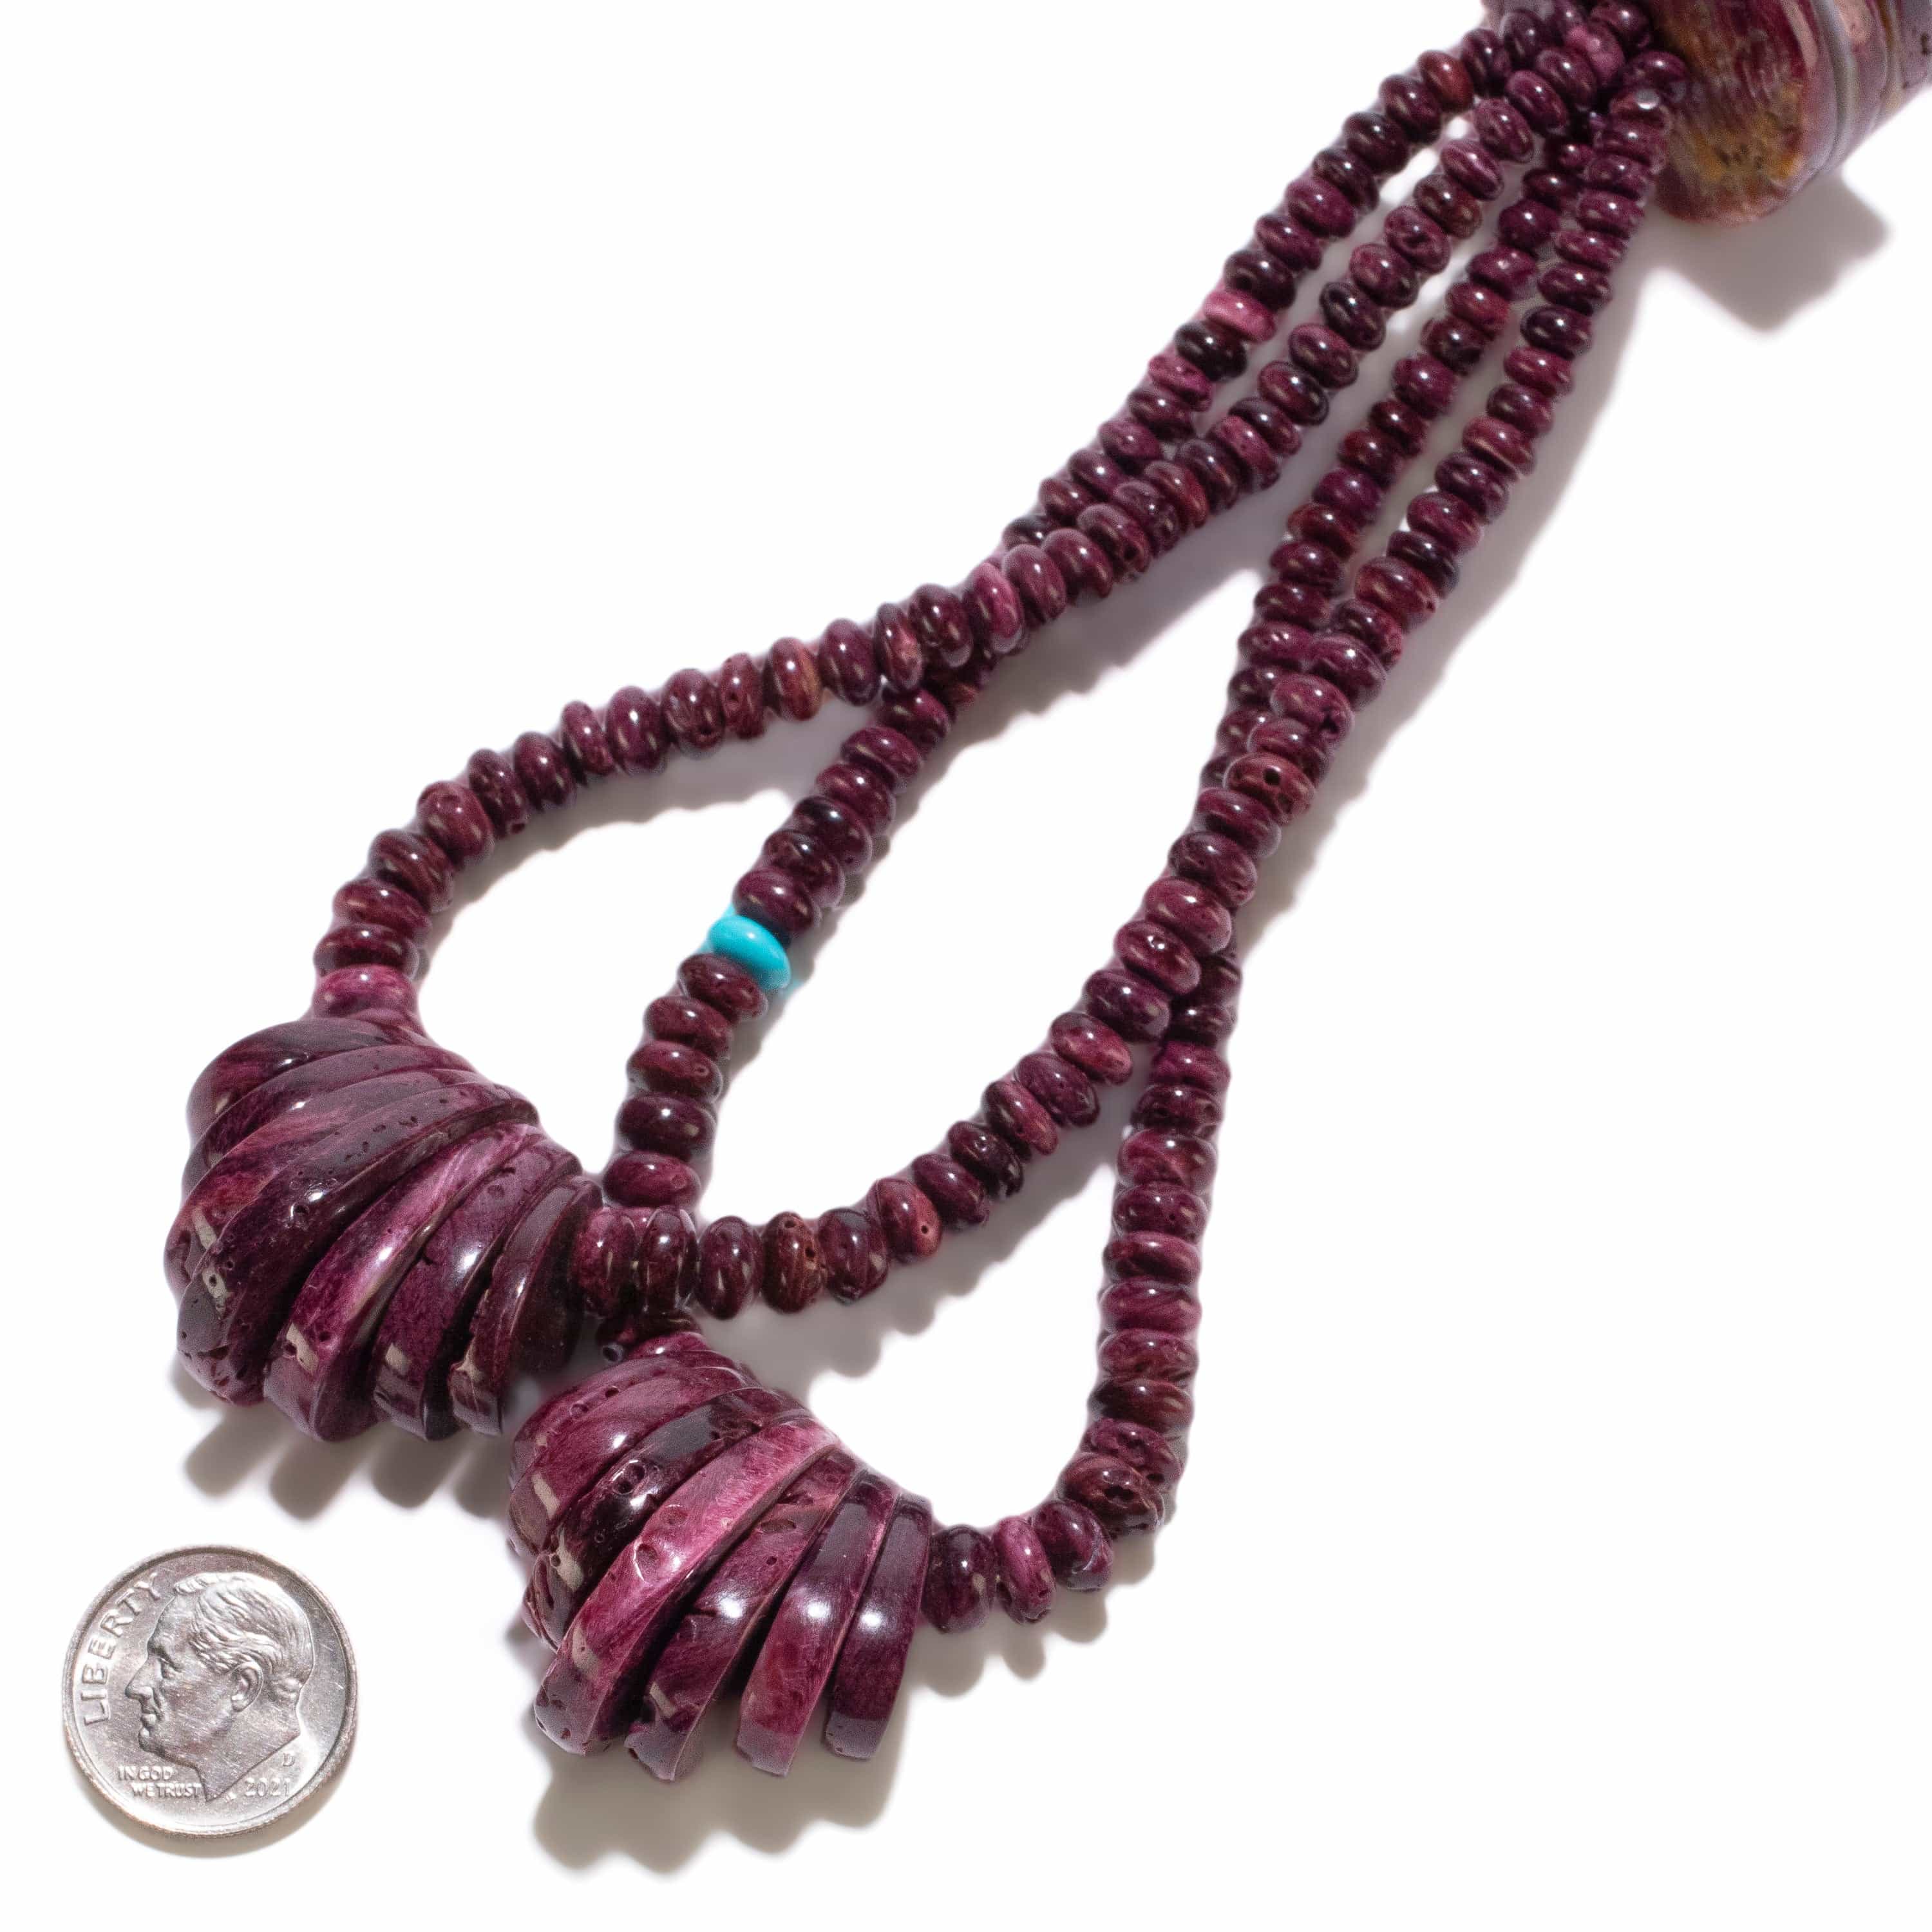 Kalifano Native American Jewelry 36" Purple Spiny Oyster Shell USA Native American Made Heishi Bead Necklace NAN2400.014